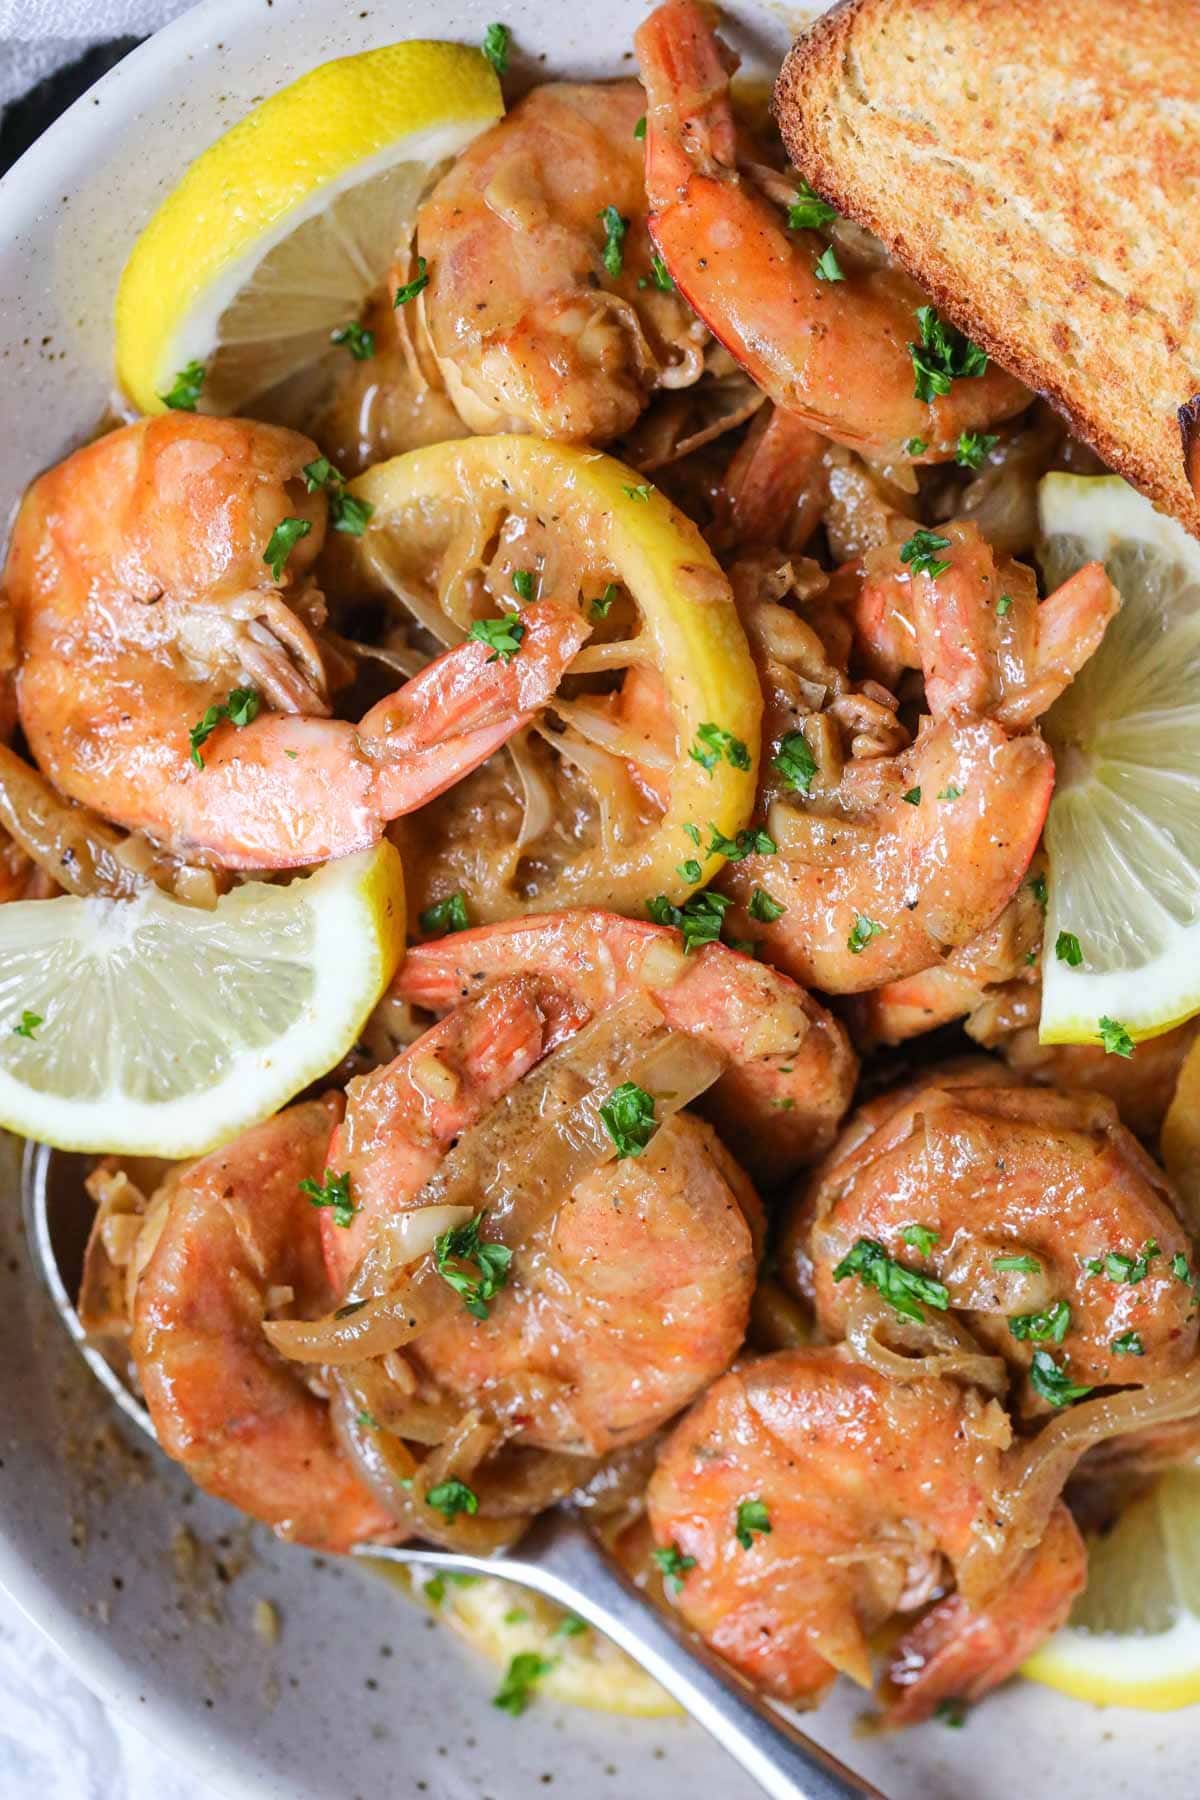 New Orleans barbecue shrimp in a white bowl.